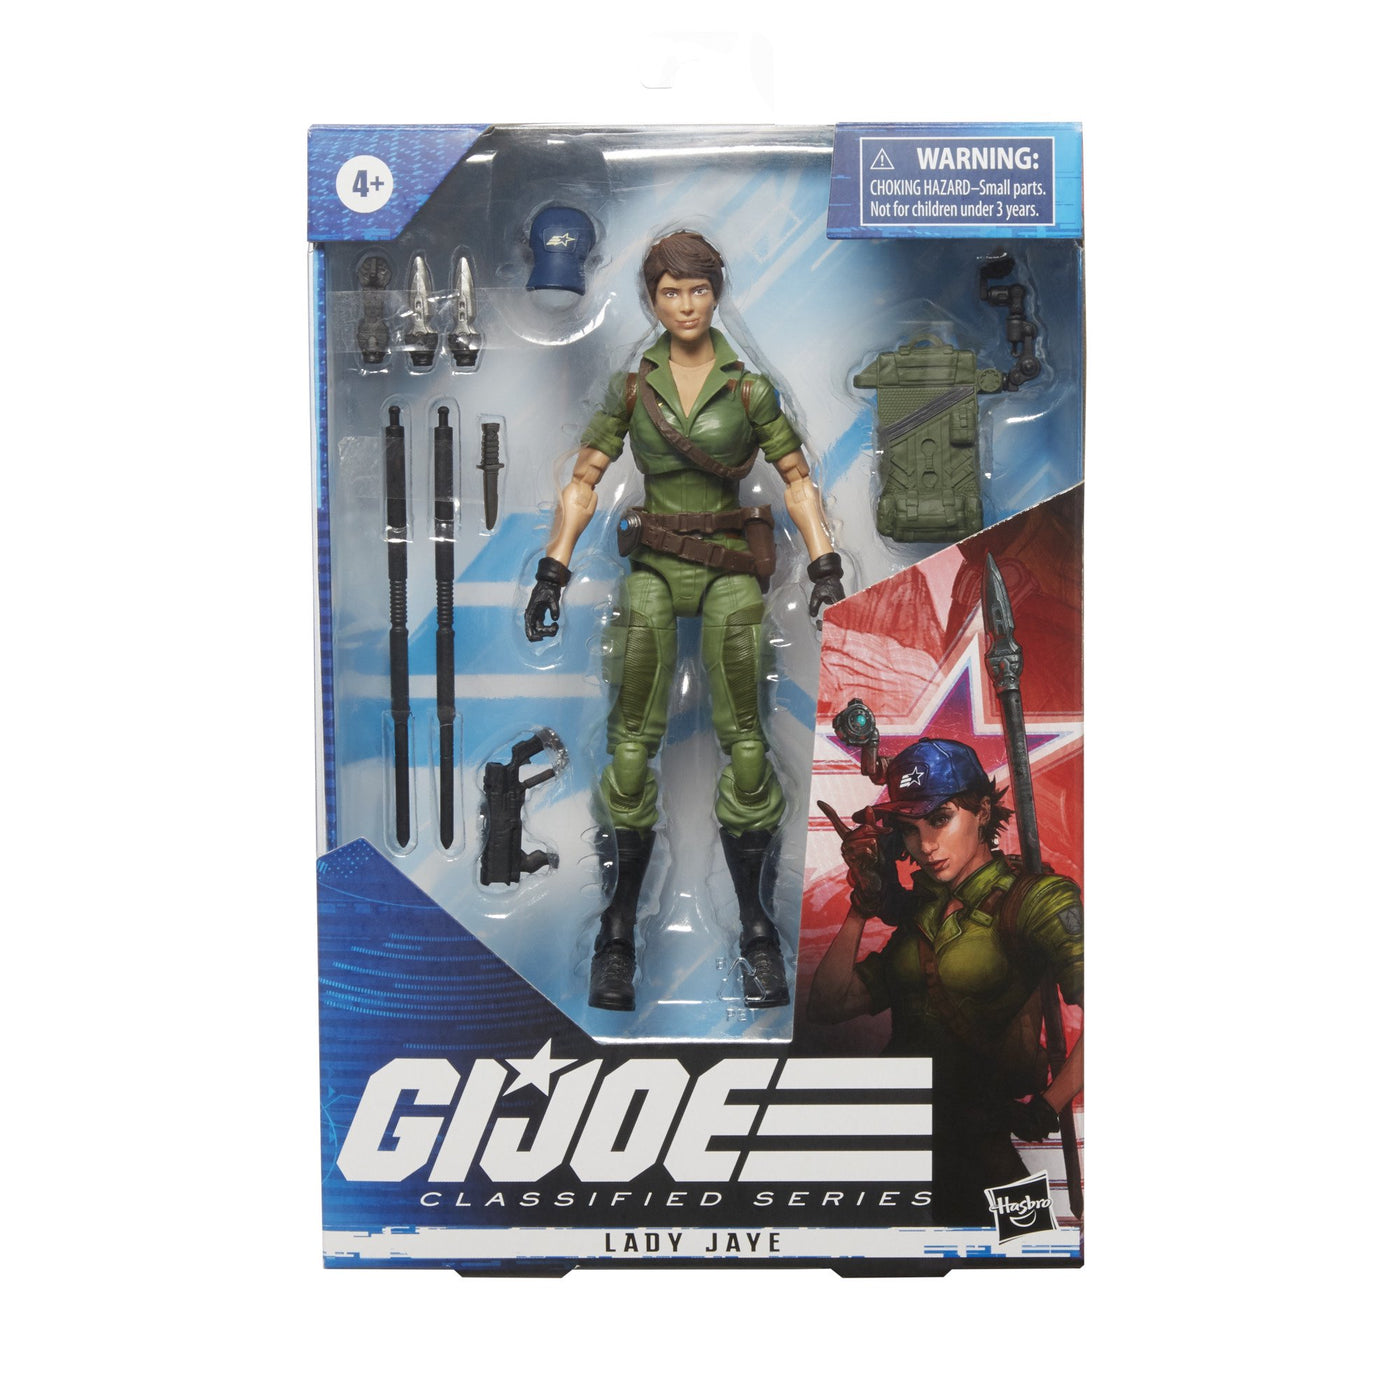 6 Inch Action Figure Accessories, G.i.joe Classified Series